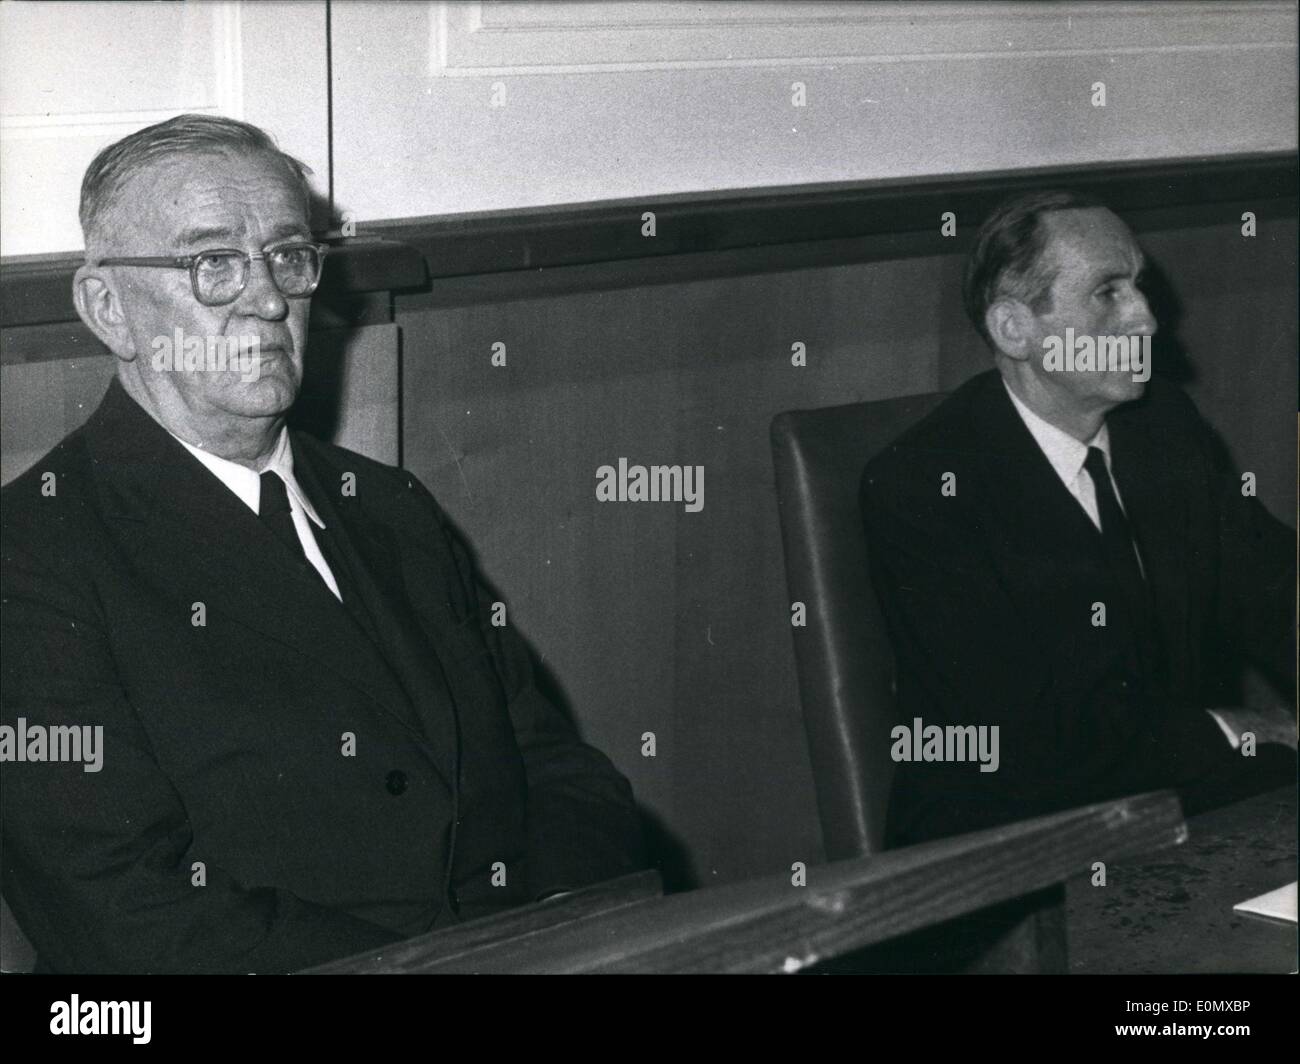 Jan. 30, 1957 - The first R?hm-Putsch trial began in Osnabr?ck with former leader Udo Woyrsch(right) and former gestapo chief Ernst M?ller-Altenau on trial first. They are pictured in the court room. Stock Photo